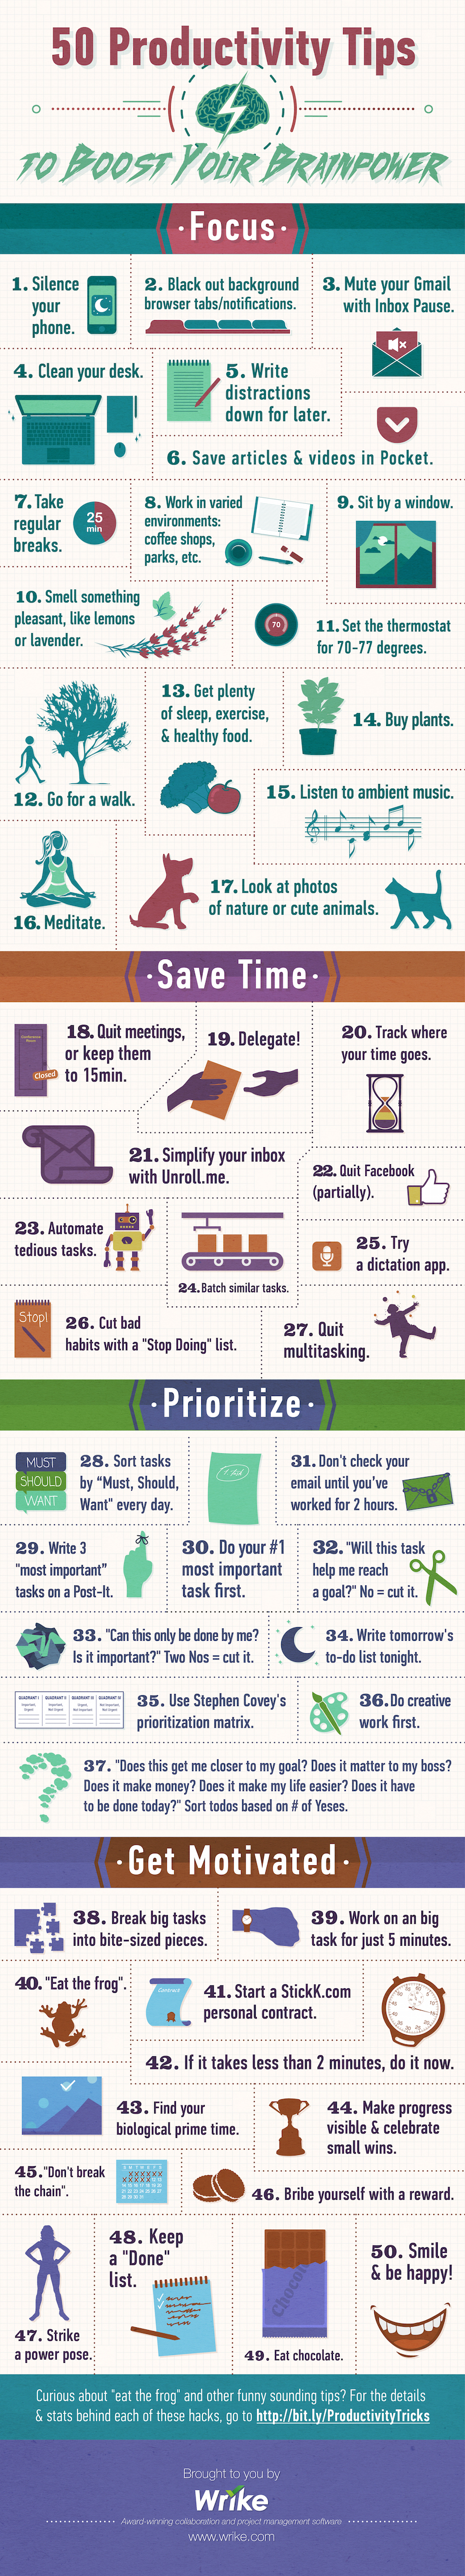 50 Productivity Tips to Boost Your Brainpower (Infographic)